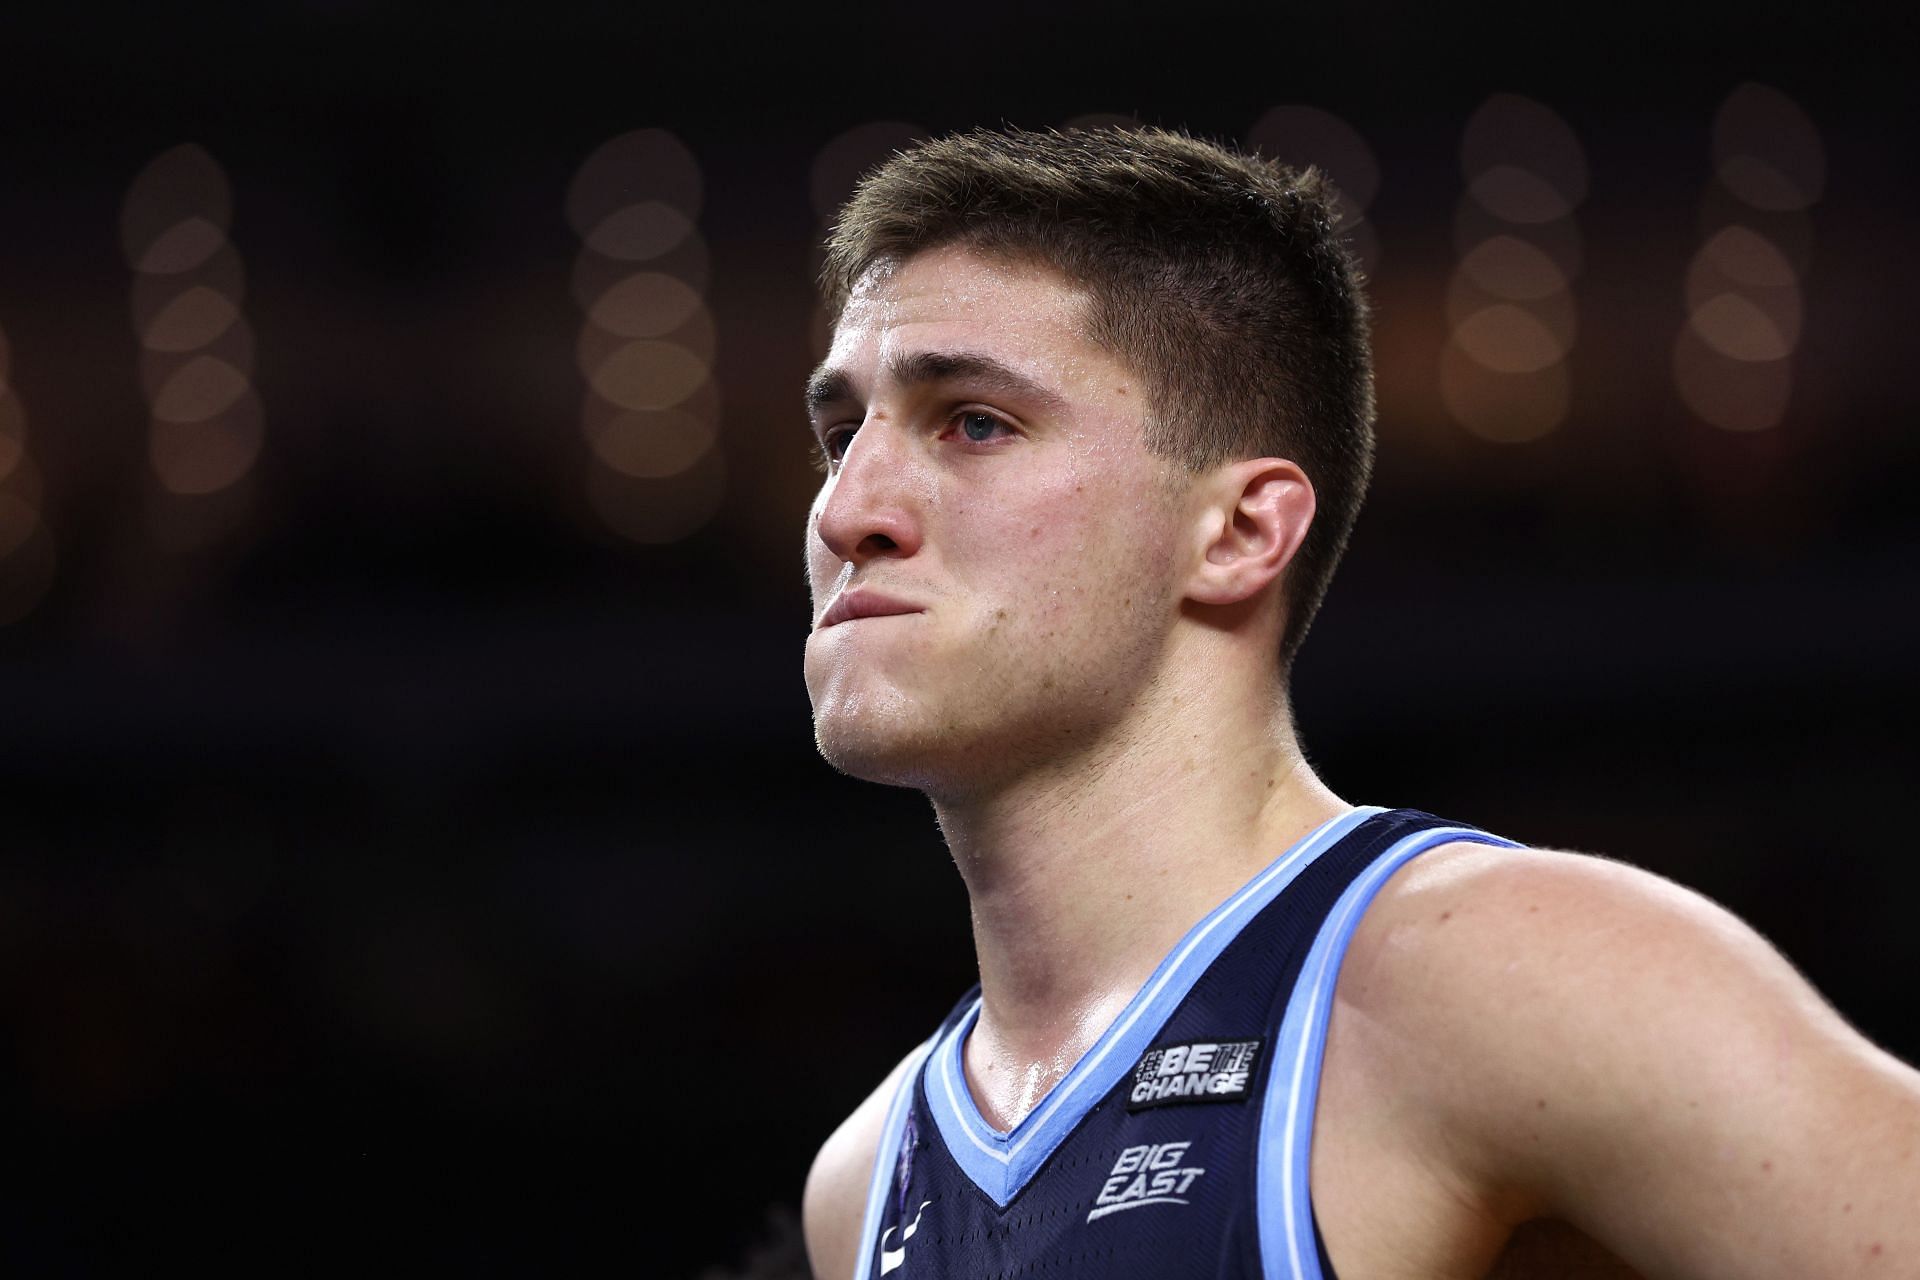 Collin Gillespie of the Villanova Wildcats signed with the Nuggets